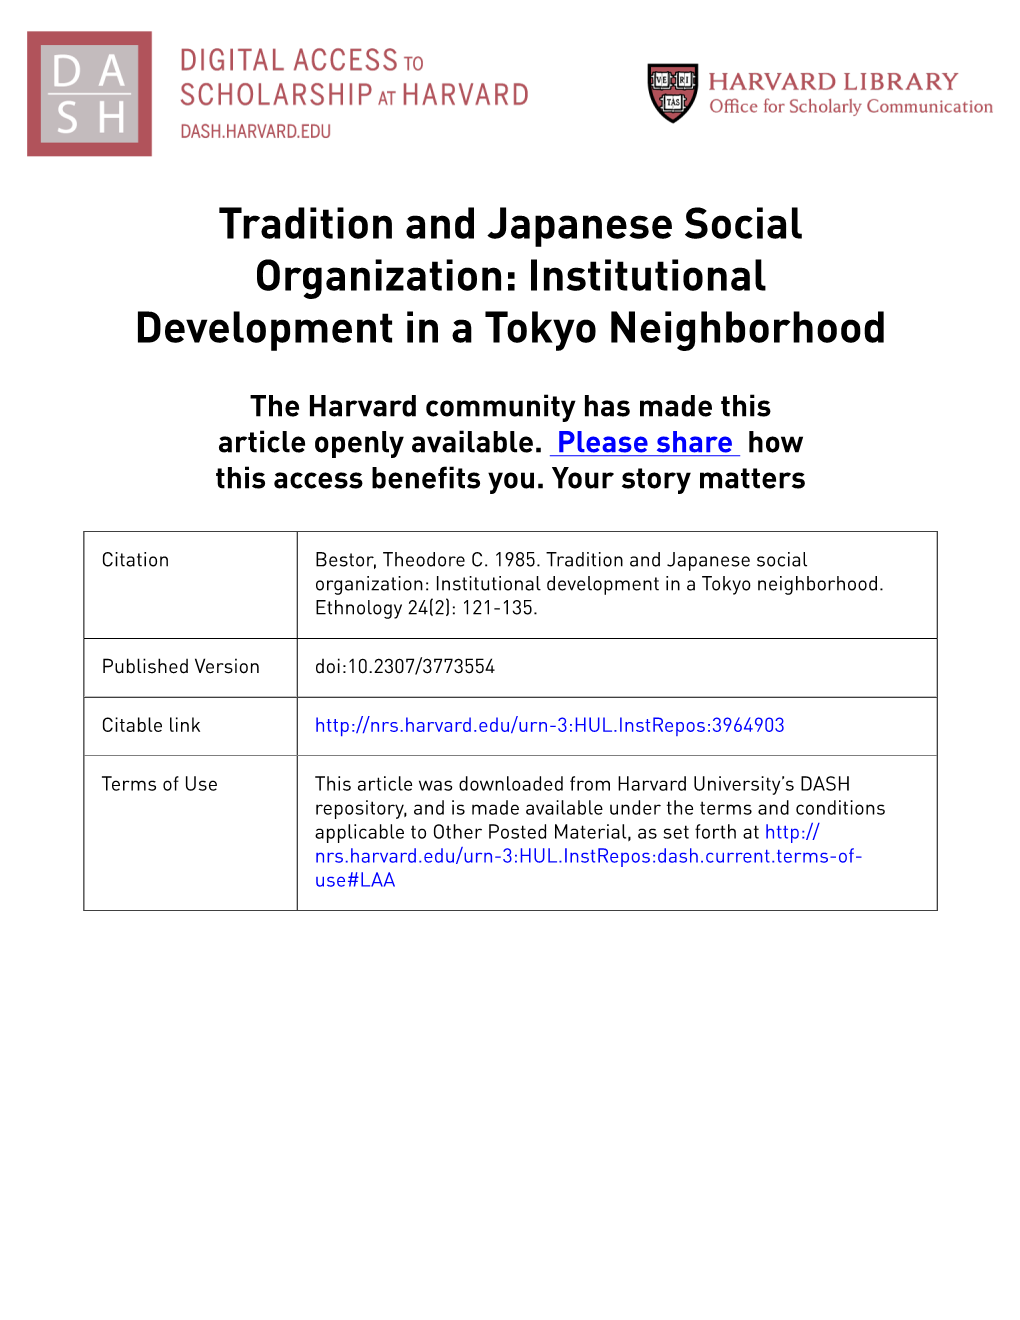 Tradition and Japanese Social Organization: Institutional Development in a Tokyo Neighborhood